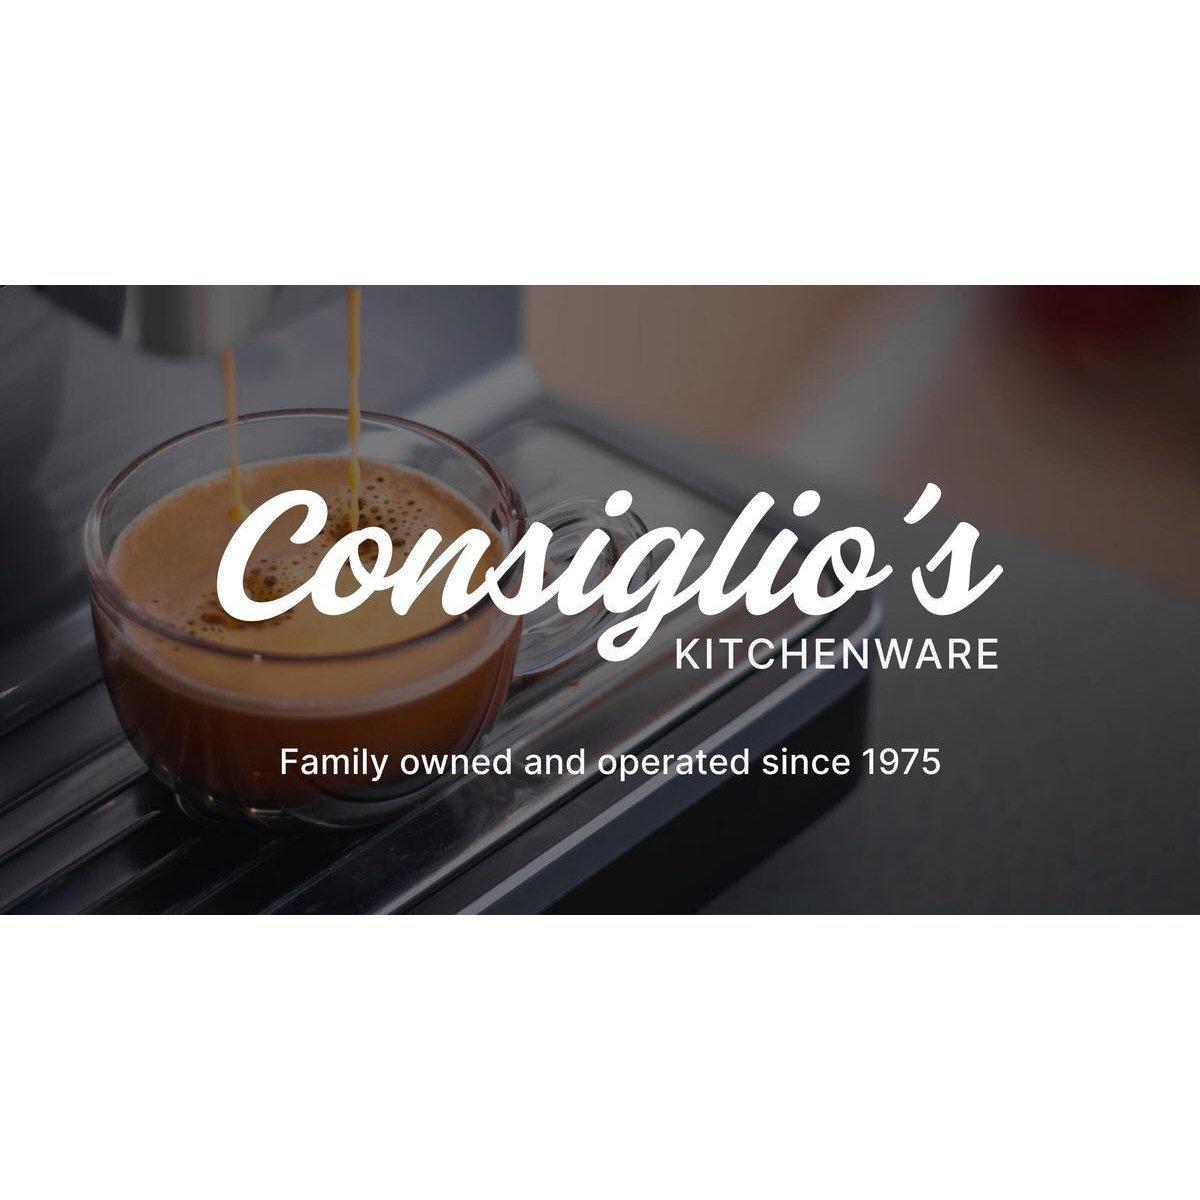 Consiglio's Kitchenware Family Owned Since 1975